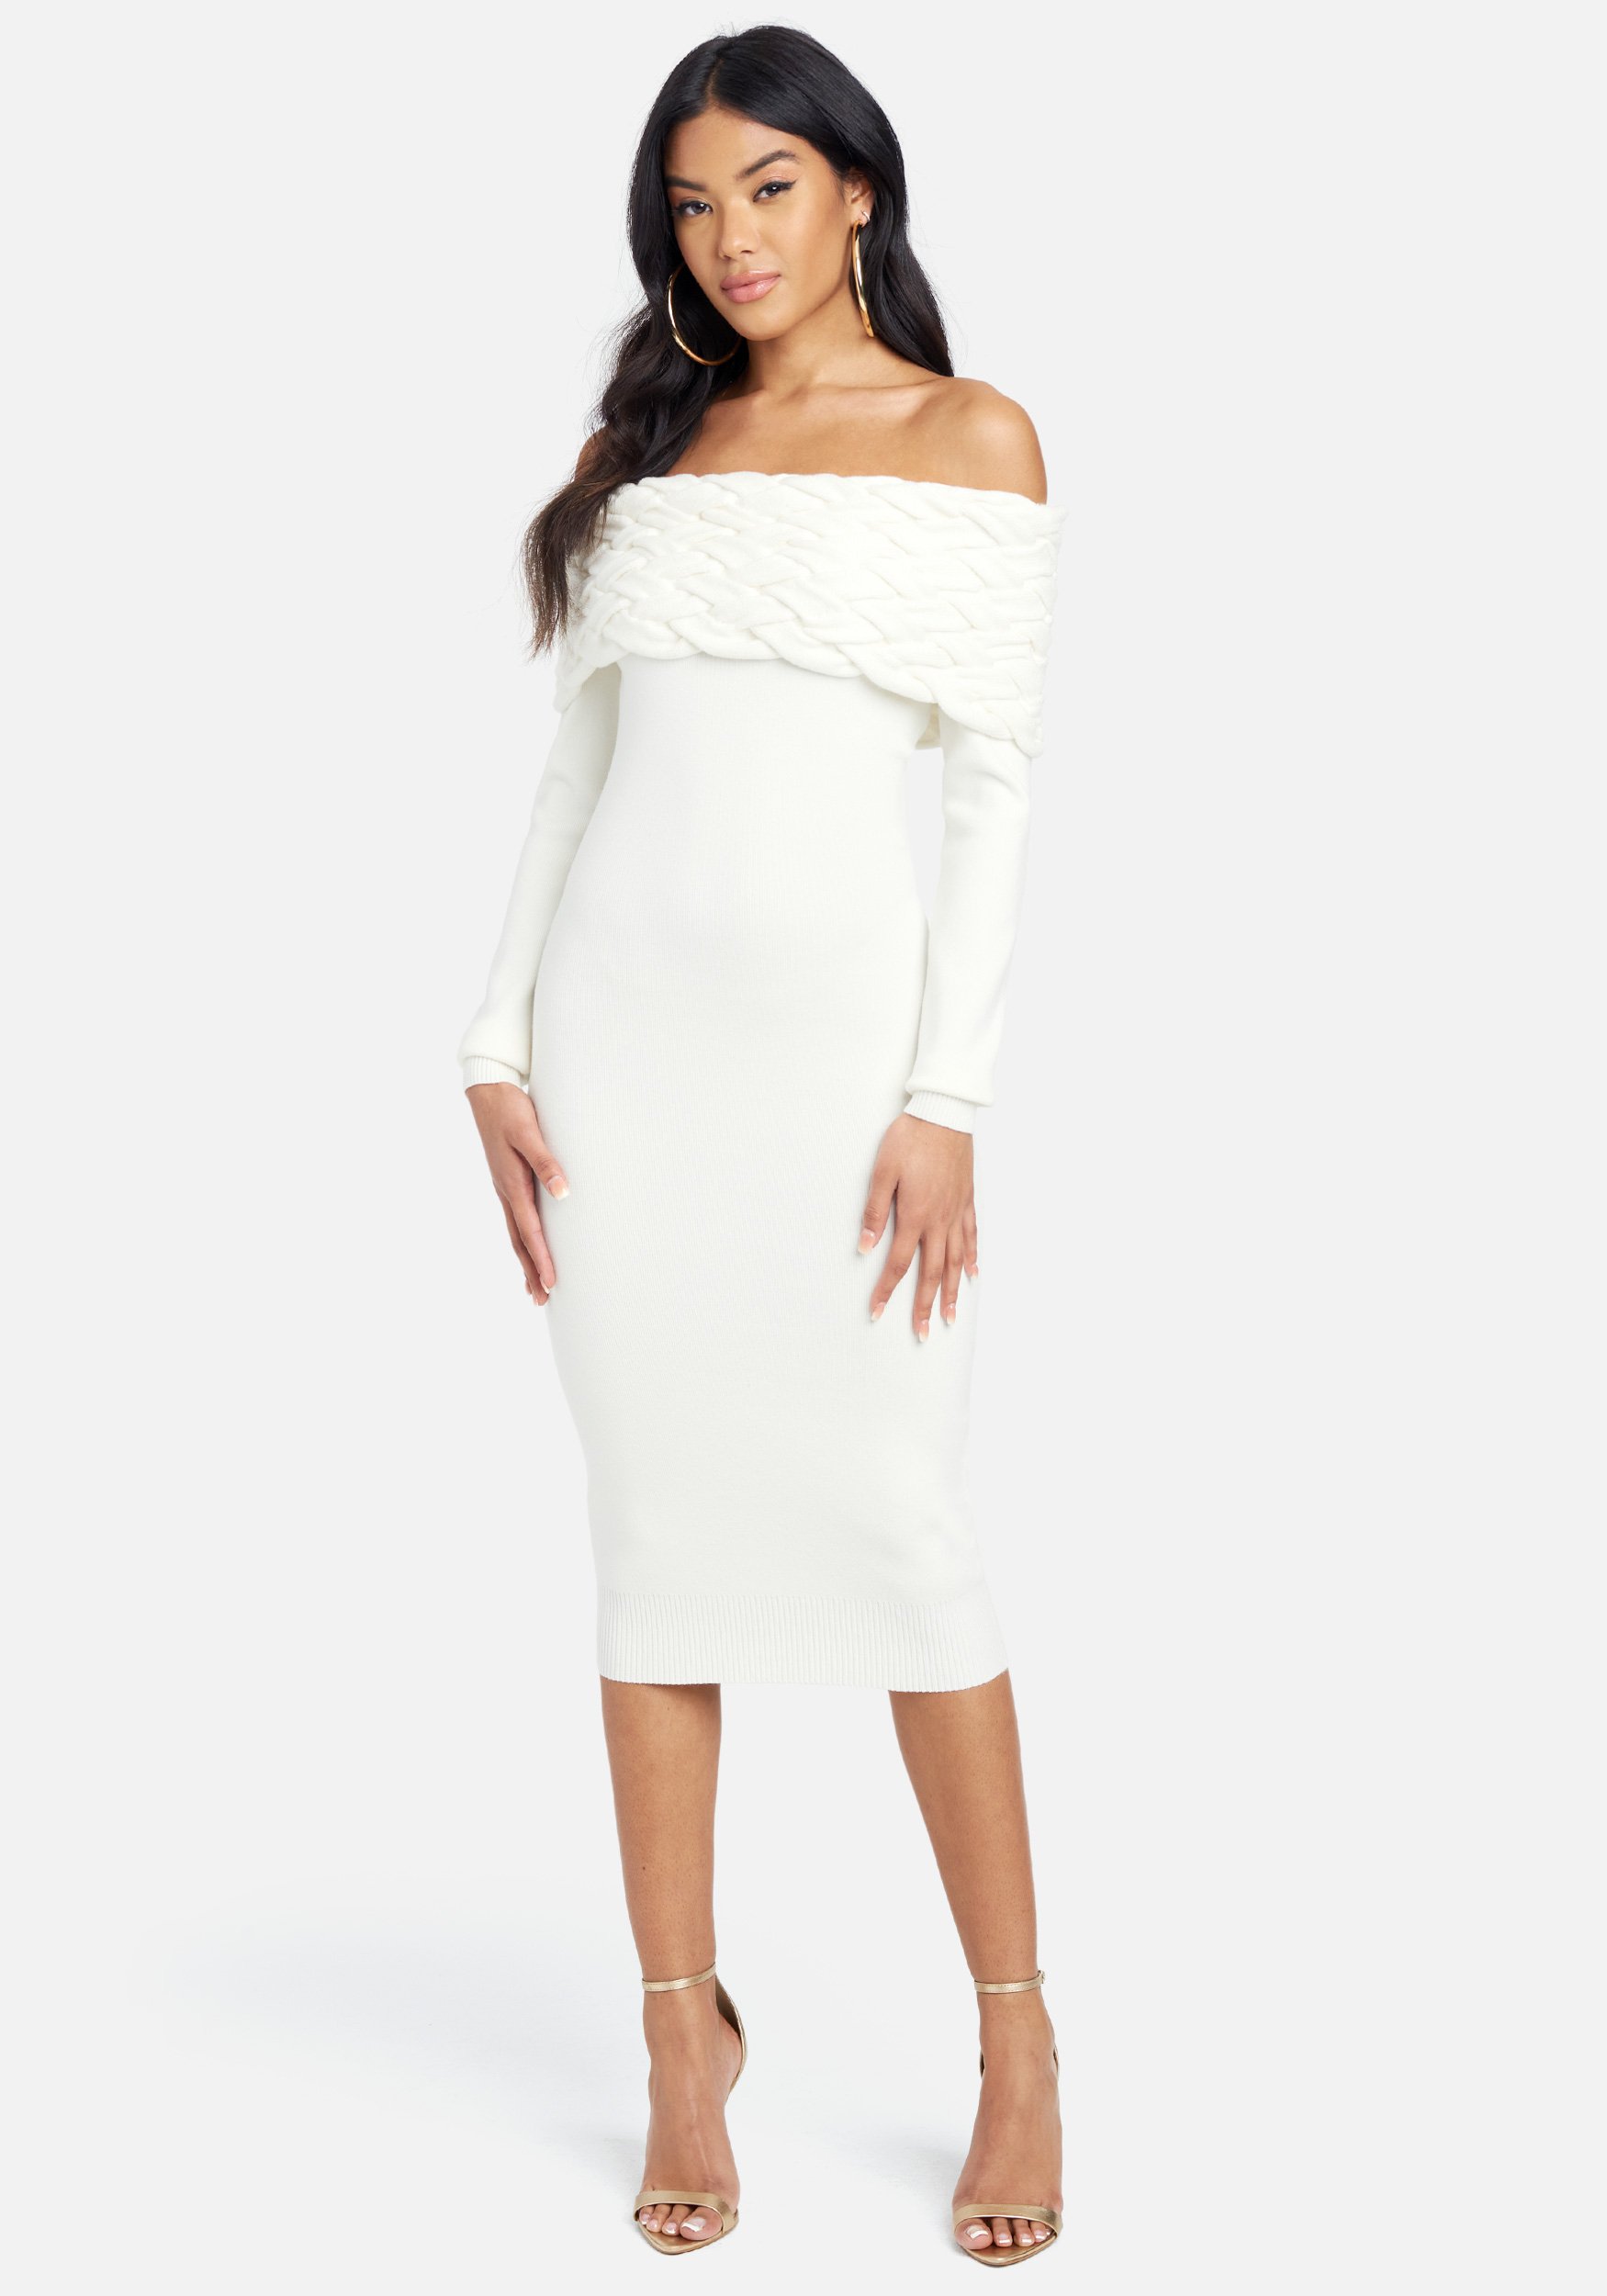 Bebe Women's Off Shoulder Cable Knit Dress, Size Medium in White Viscose